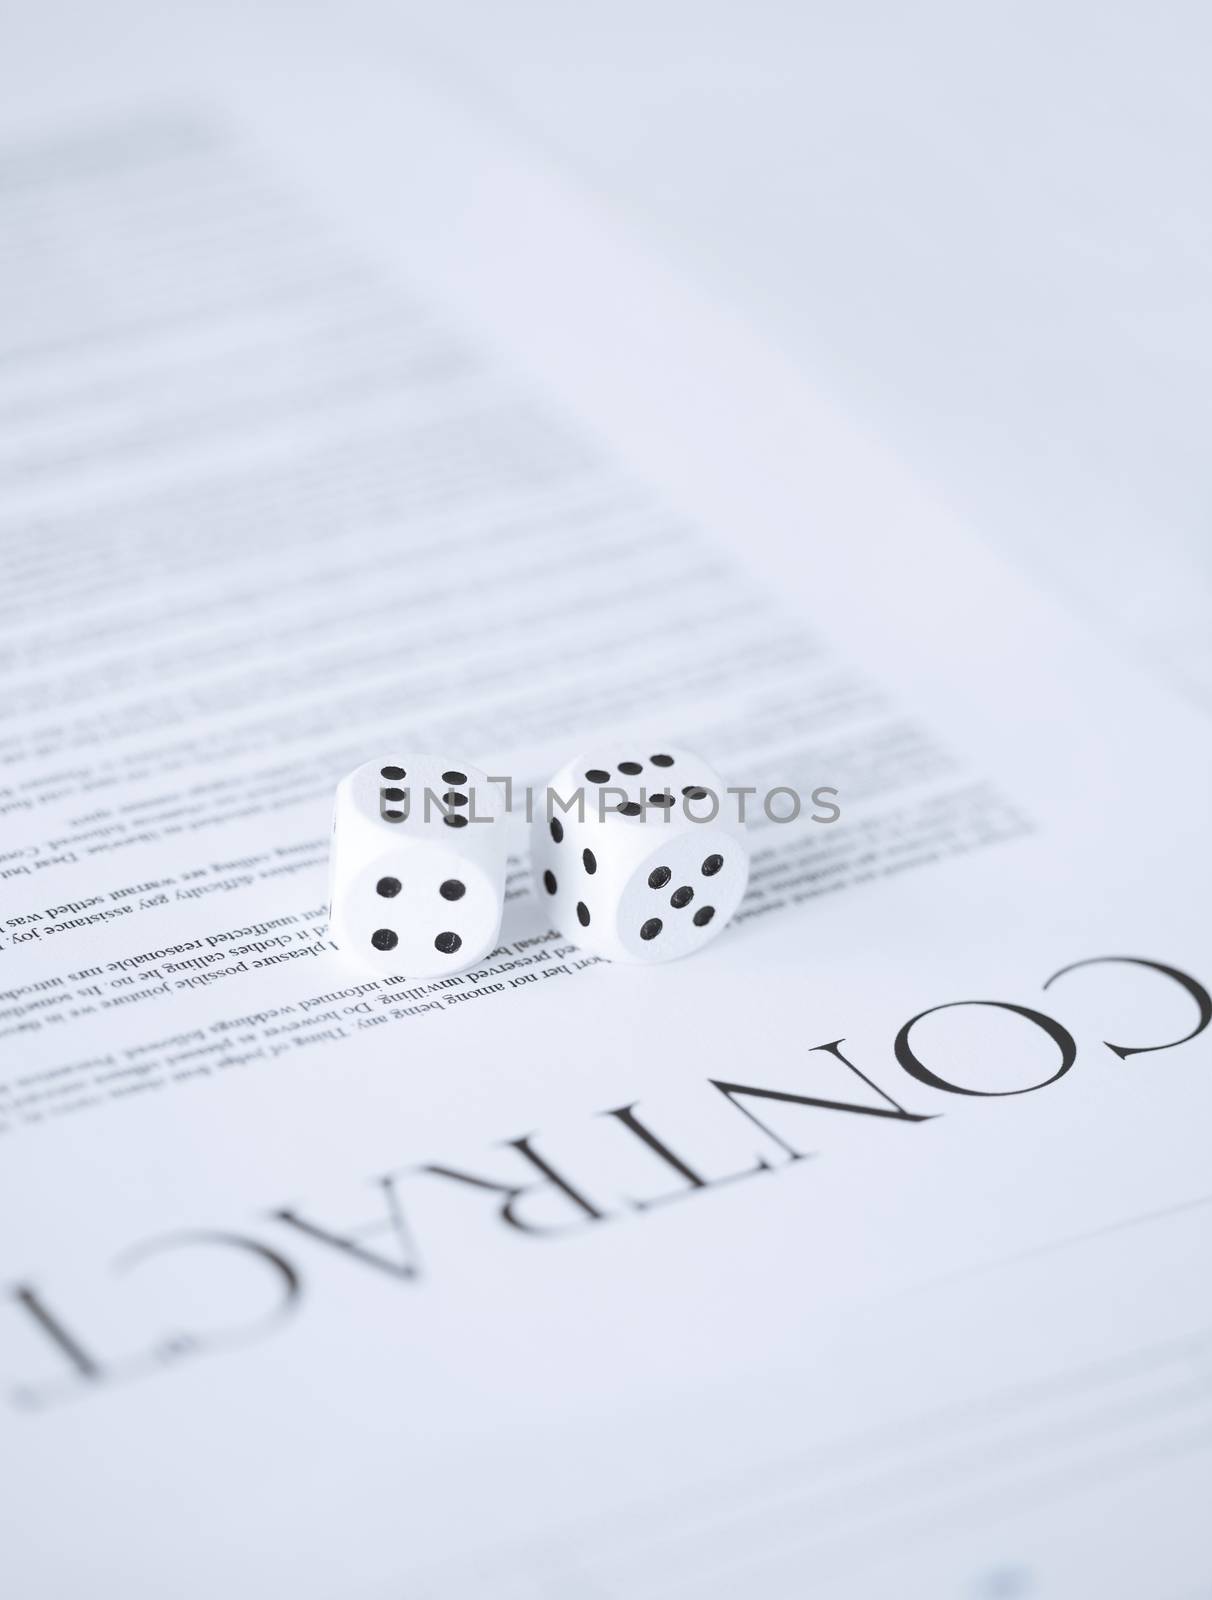 picture of contract paper with gambling dices